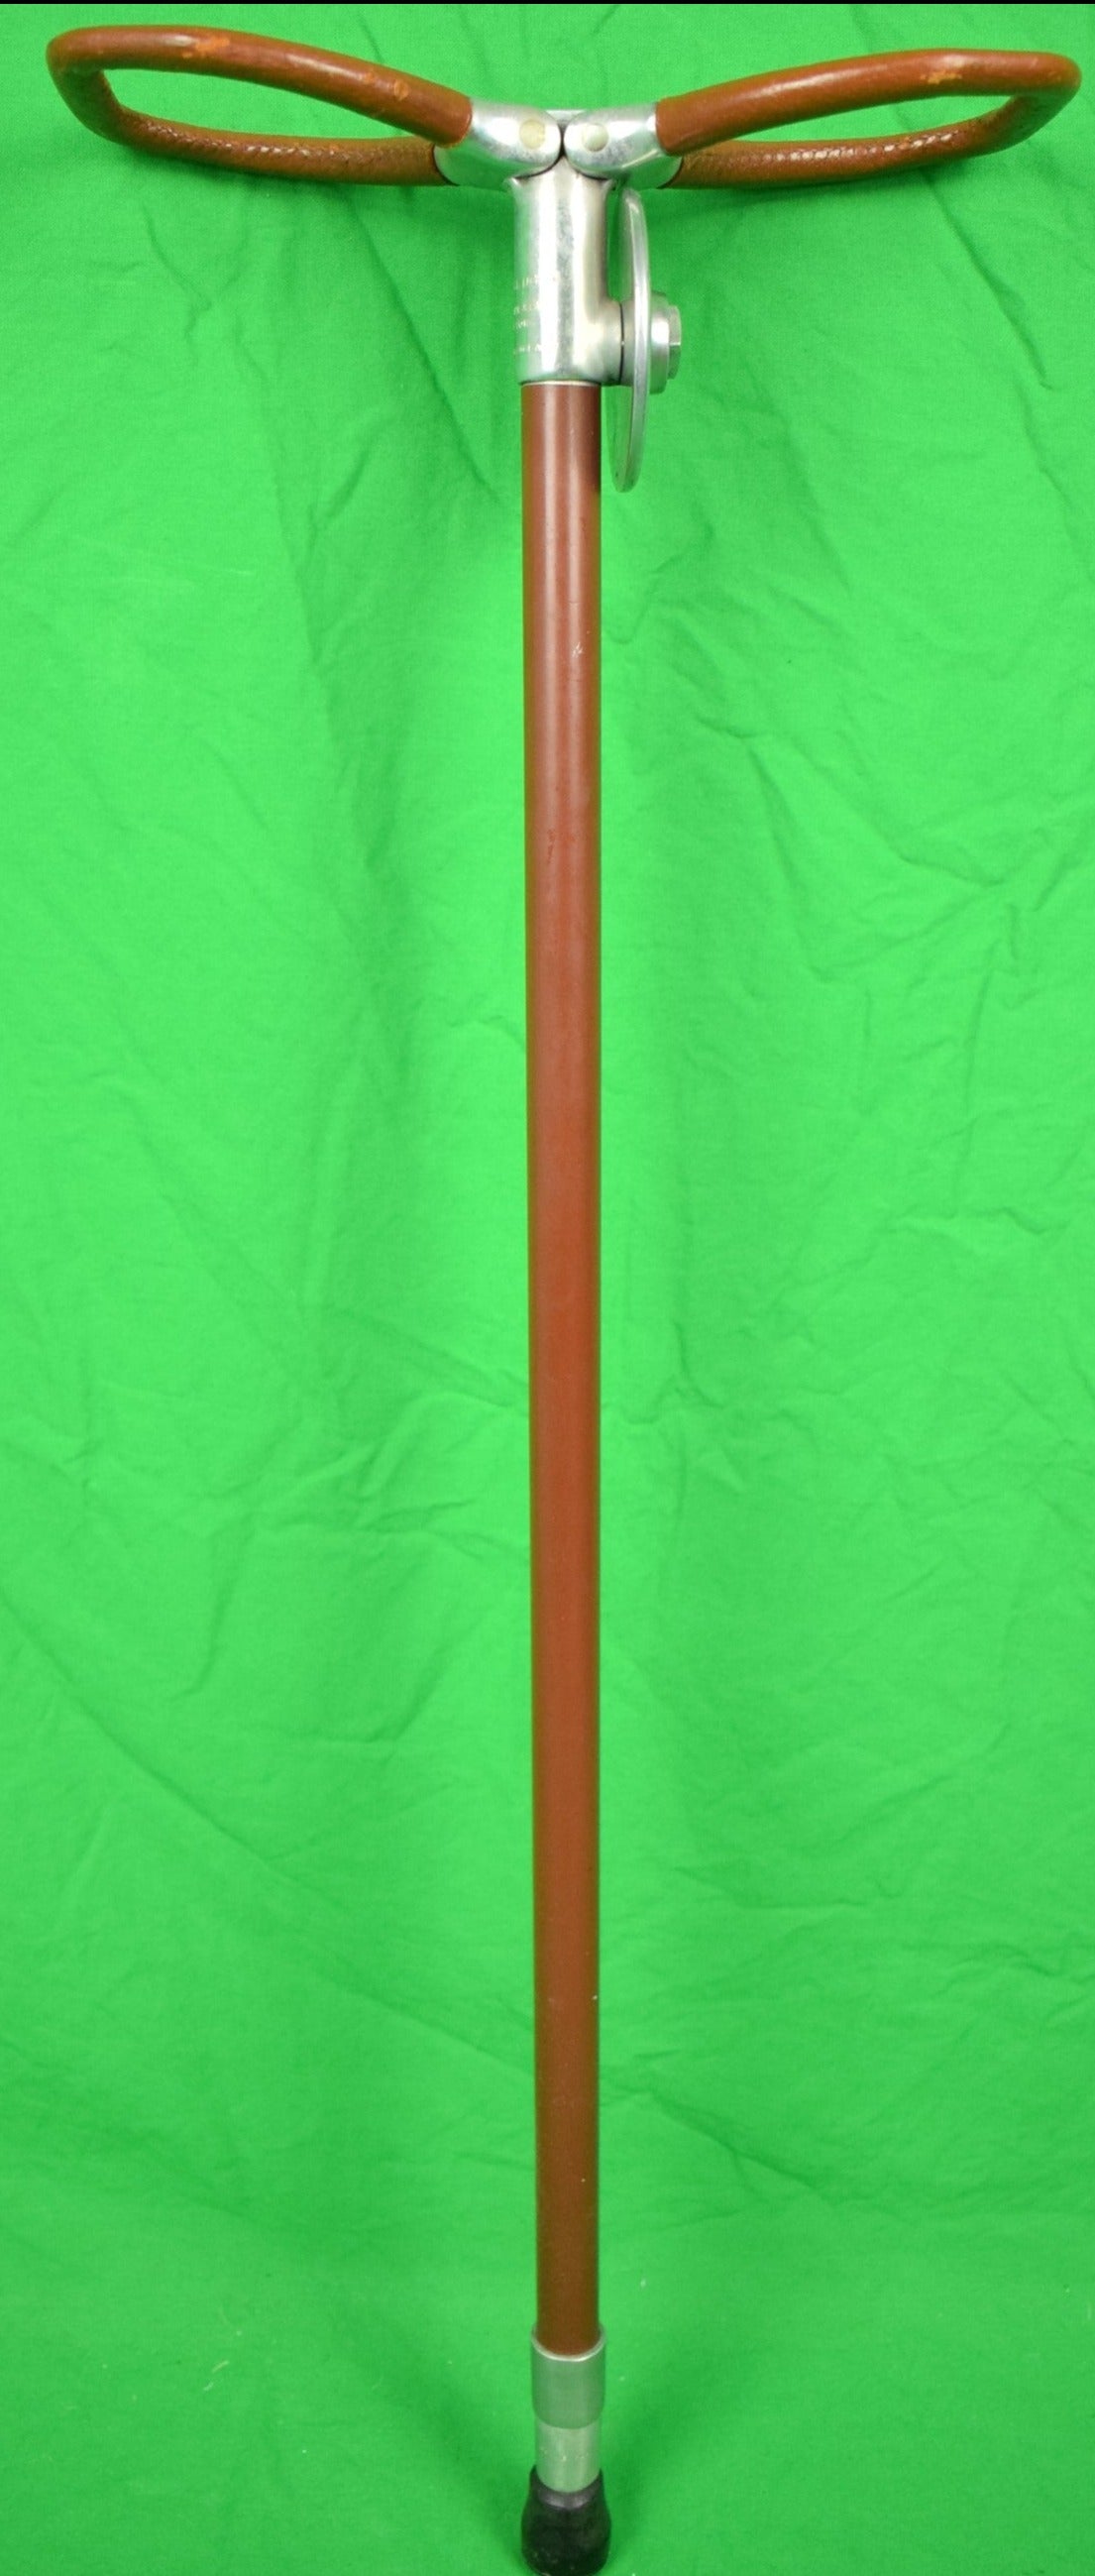 "Abercrombie & Fitch 'Churchill Downs' Shooting Stick Made in England"